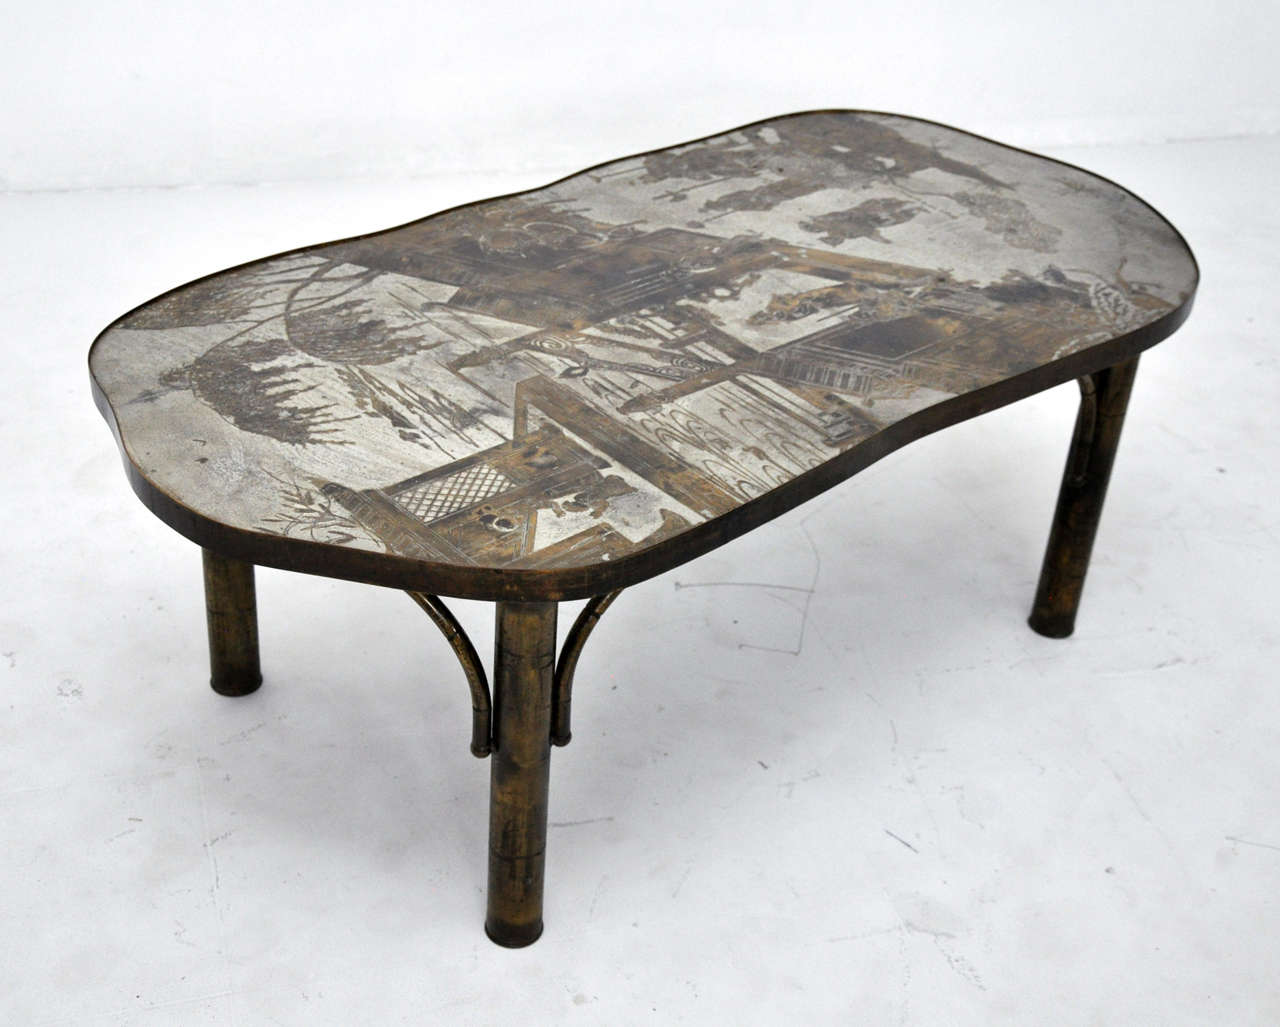 Coffee table in acid-etched patinated and polychromed bronze and pewter by Philip and Kelvin Laverne.